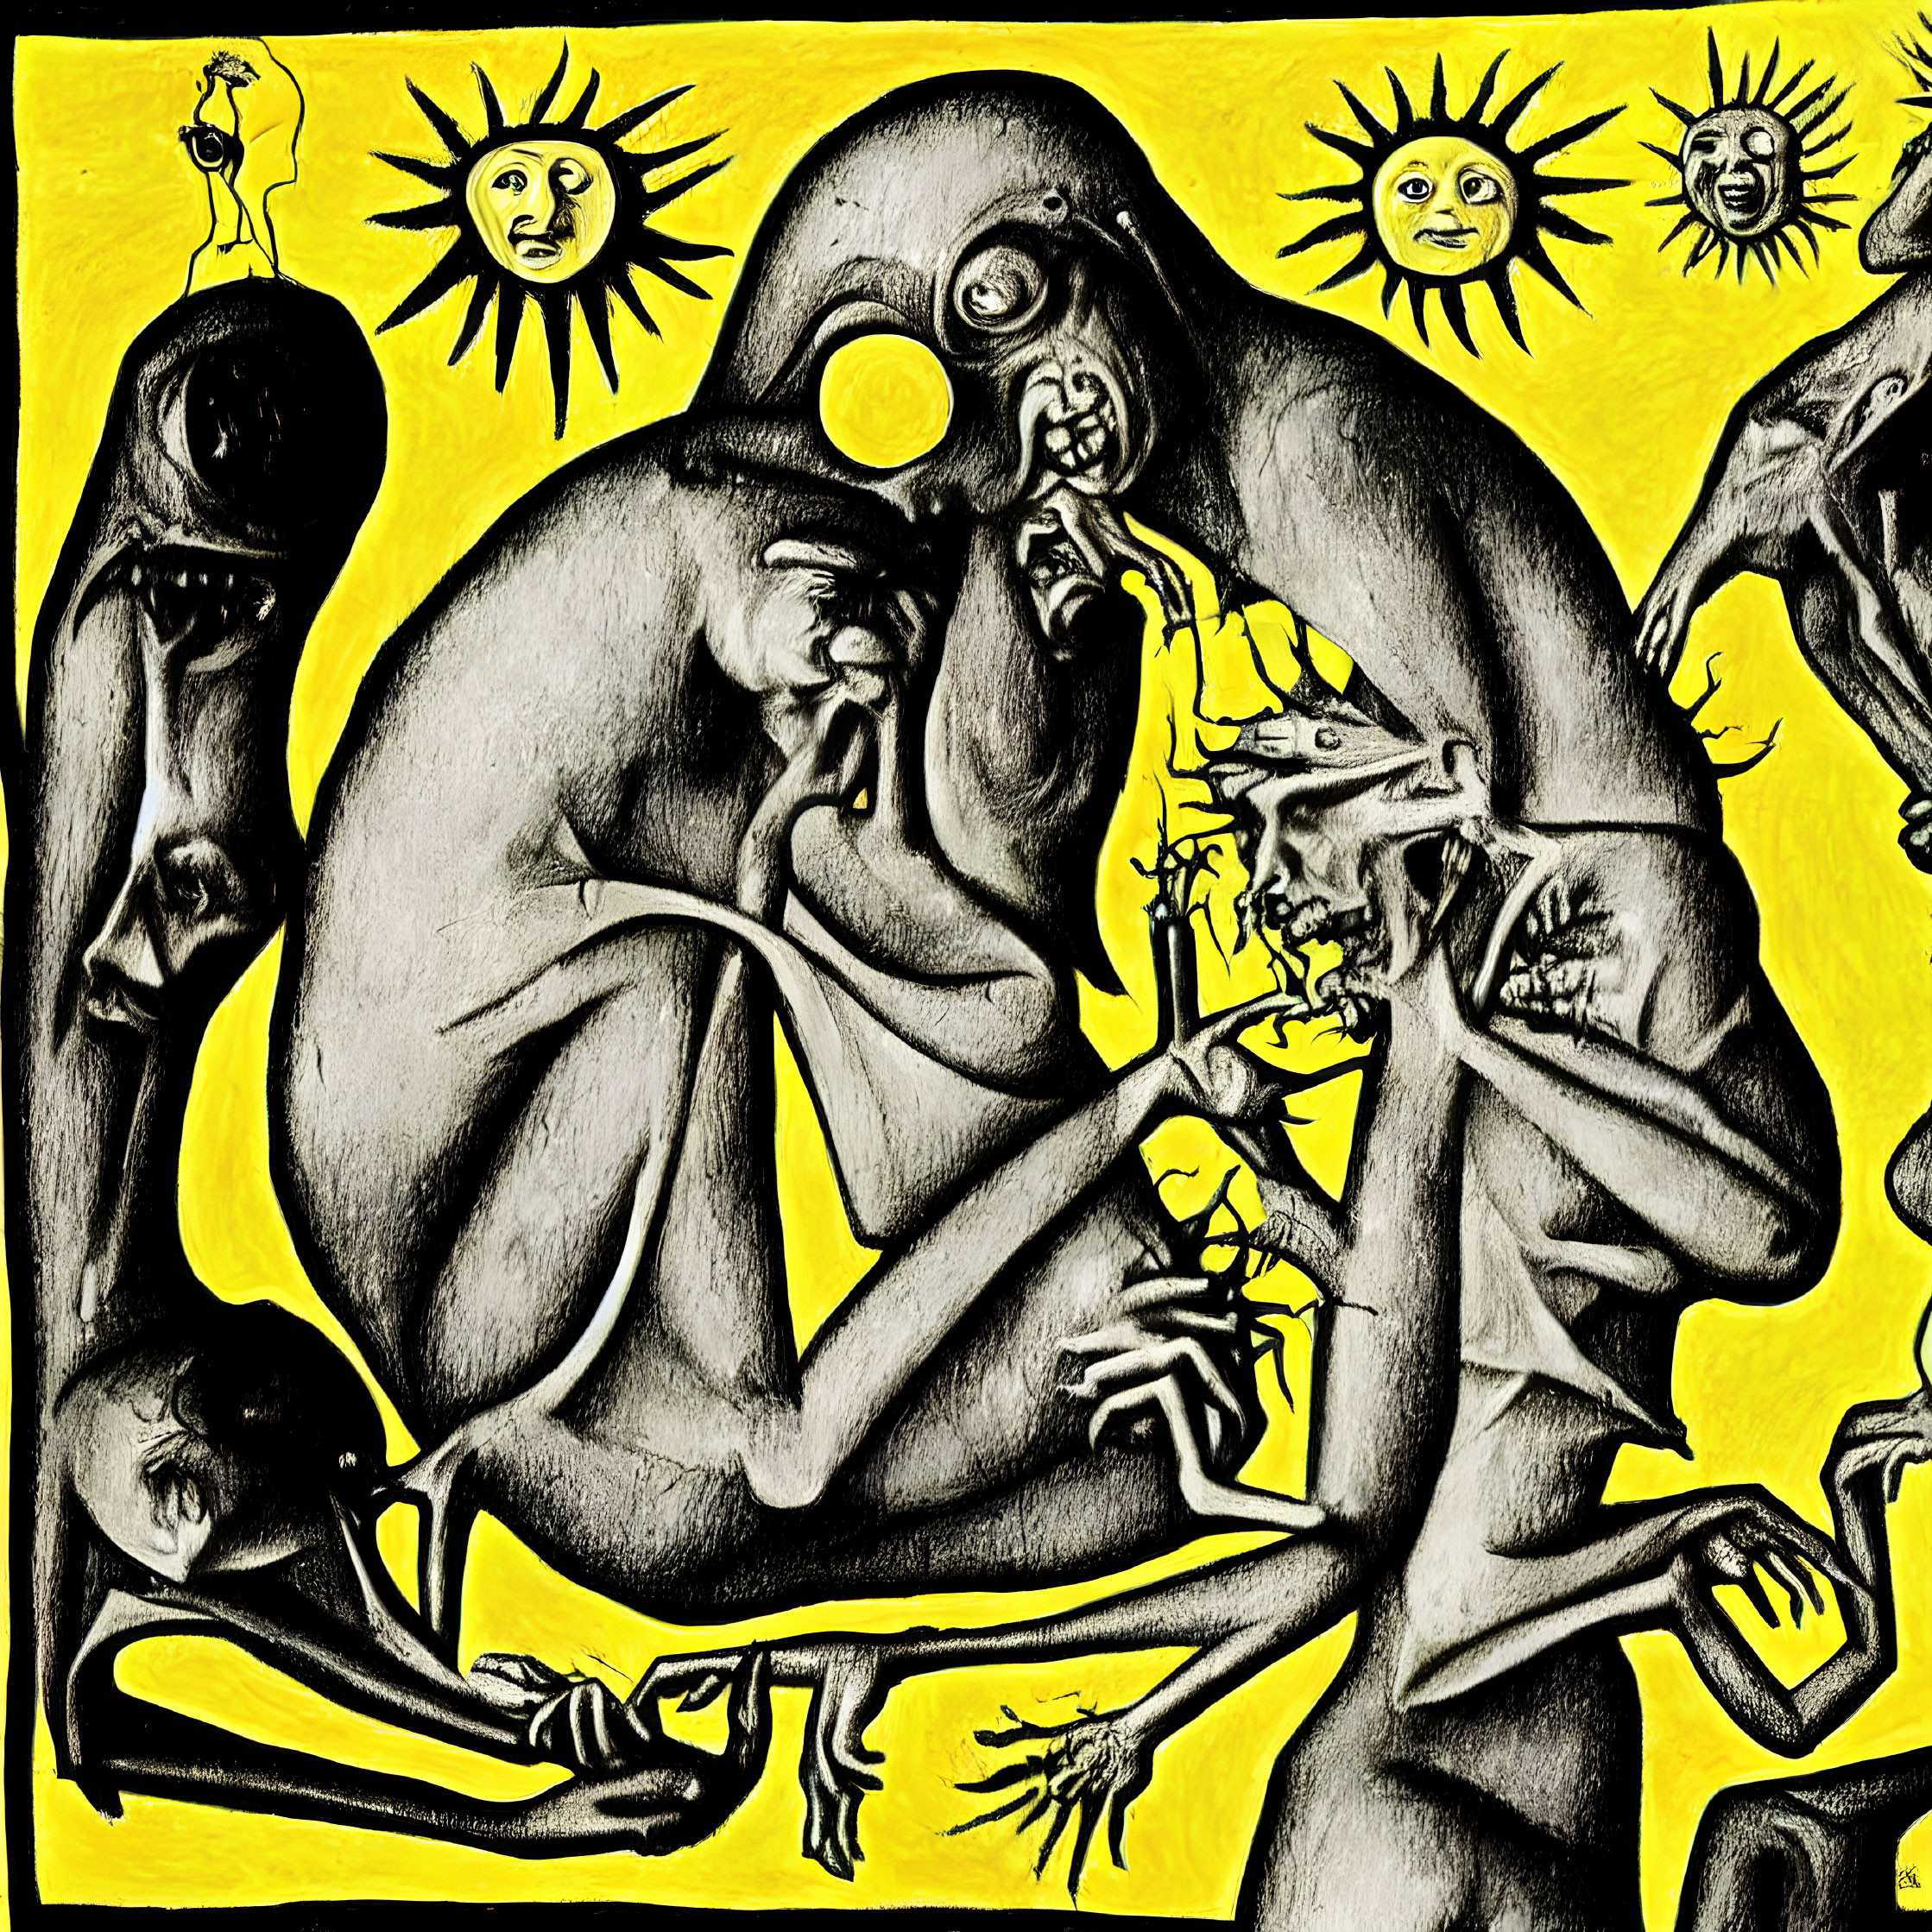 Surreal Artwork: Distorted Figures and Faces in Yellow and Black with Multiple Suns